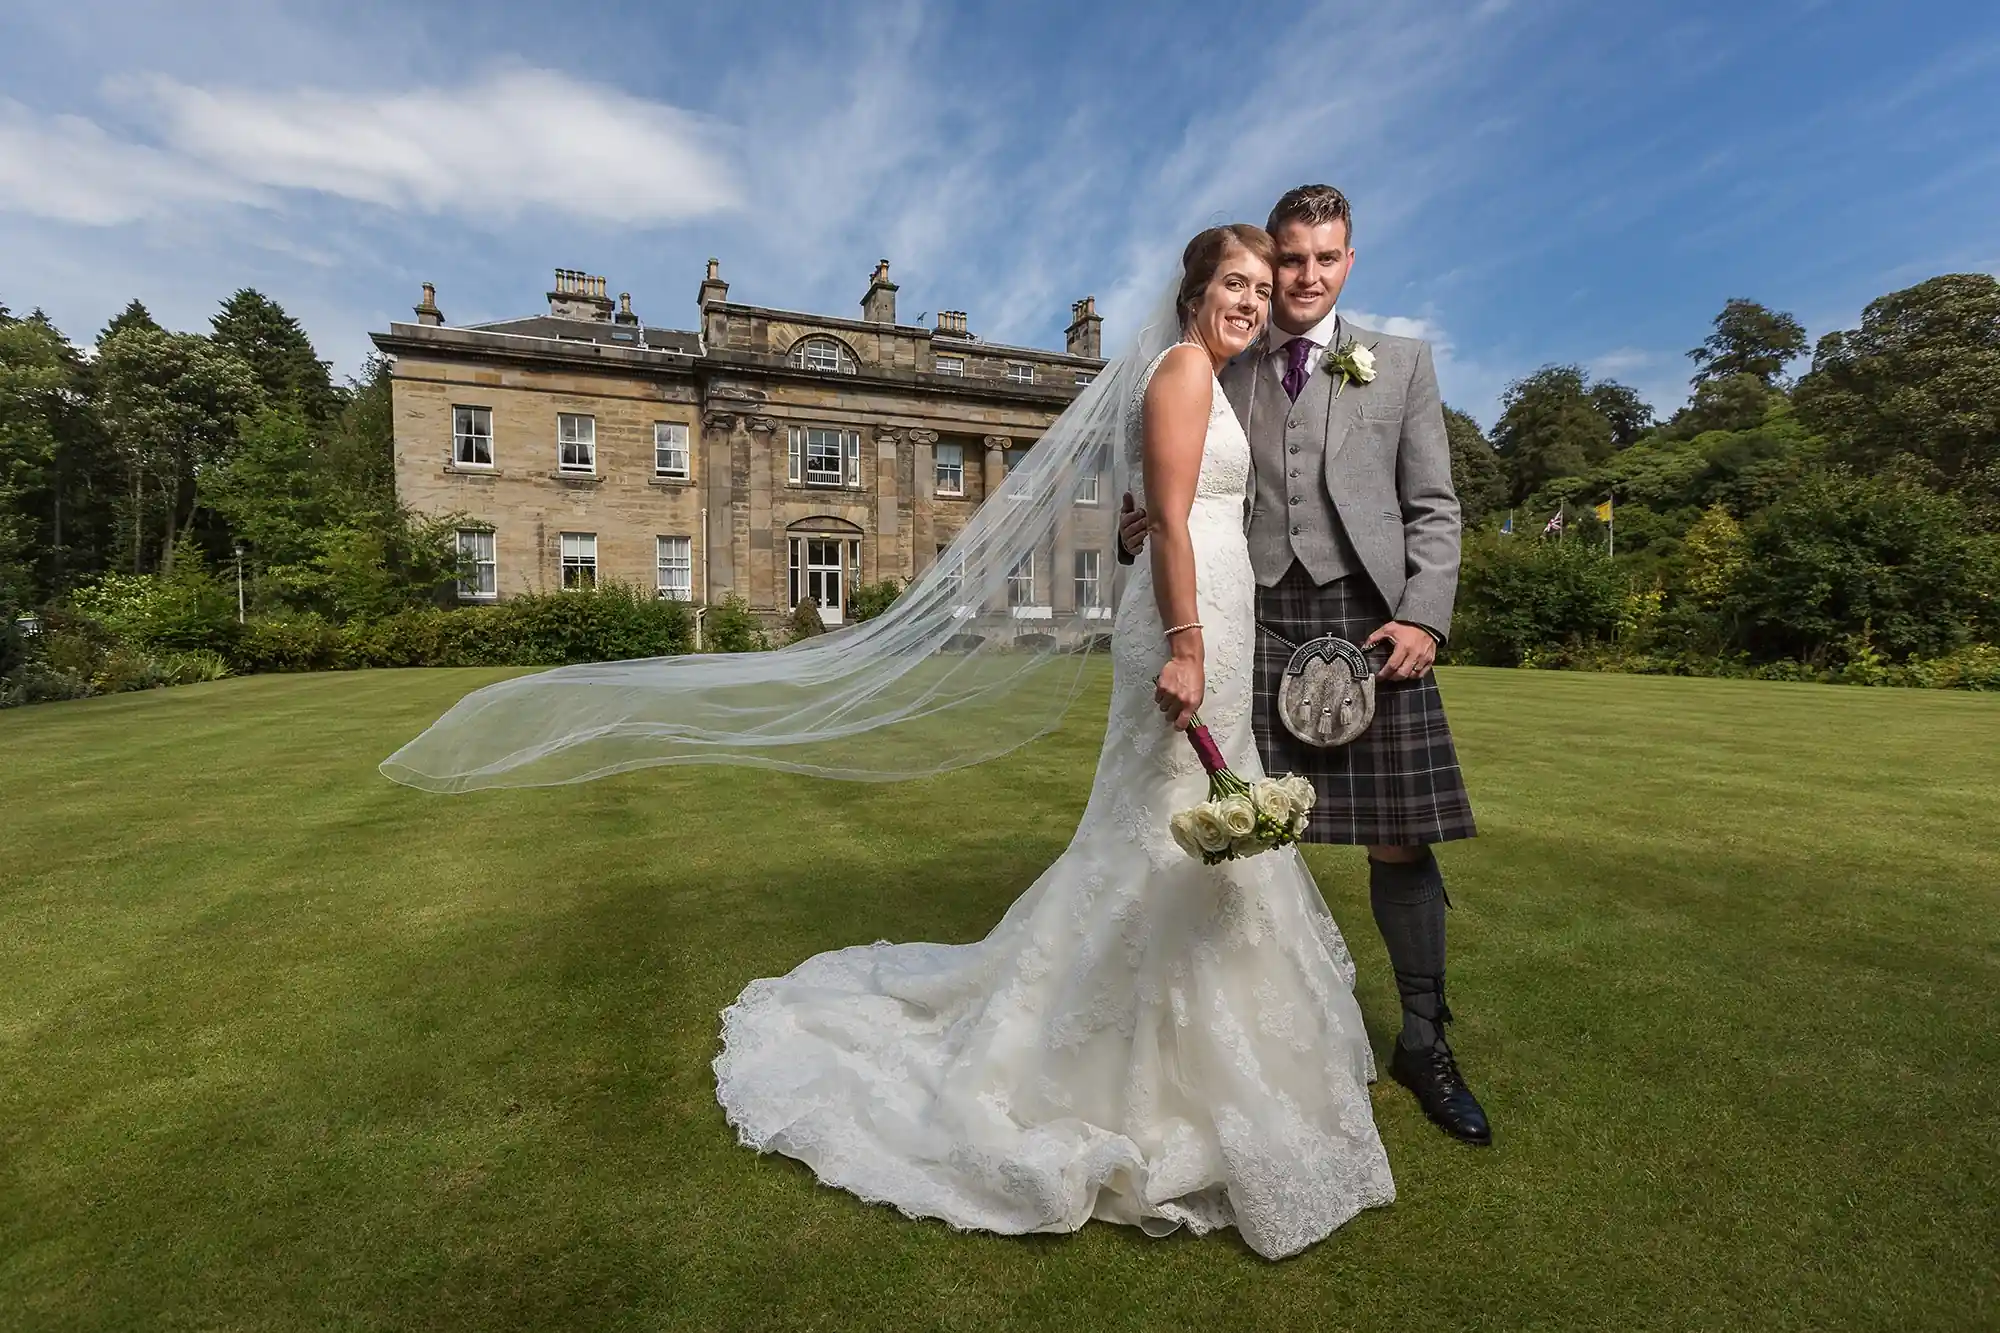 Wedding photographer in Fife for Diane and Robert